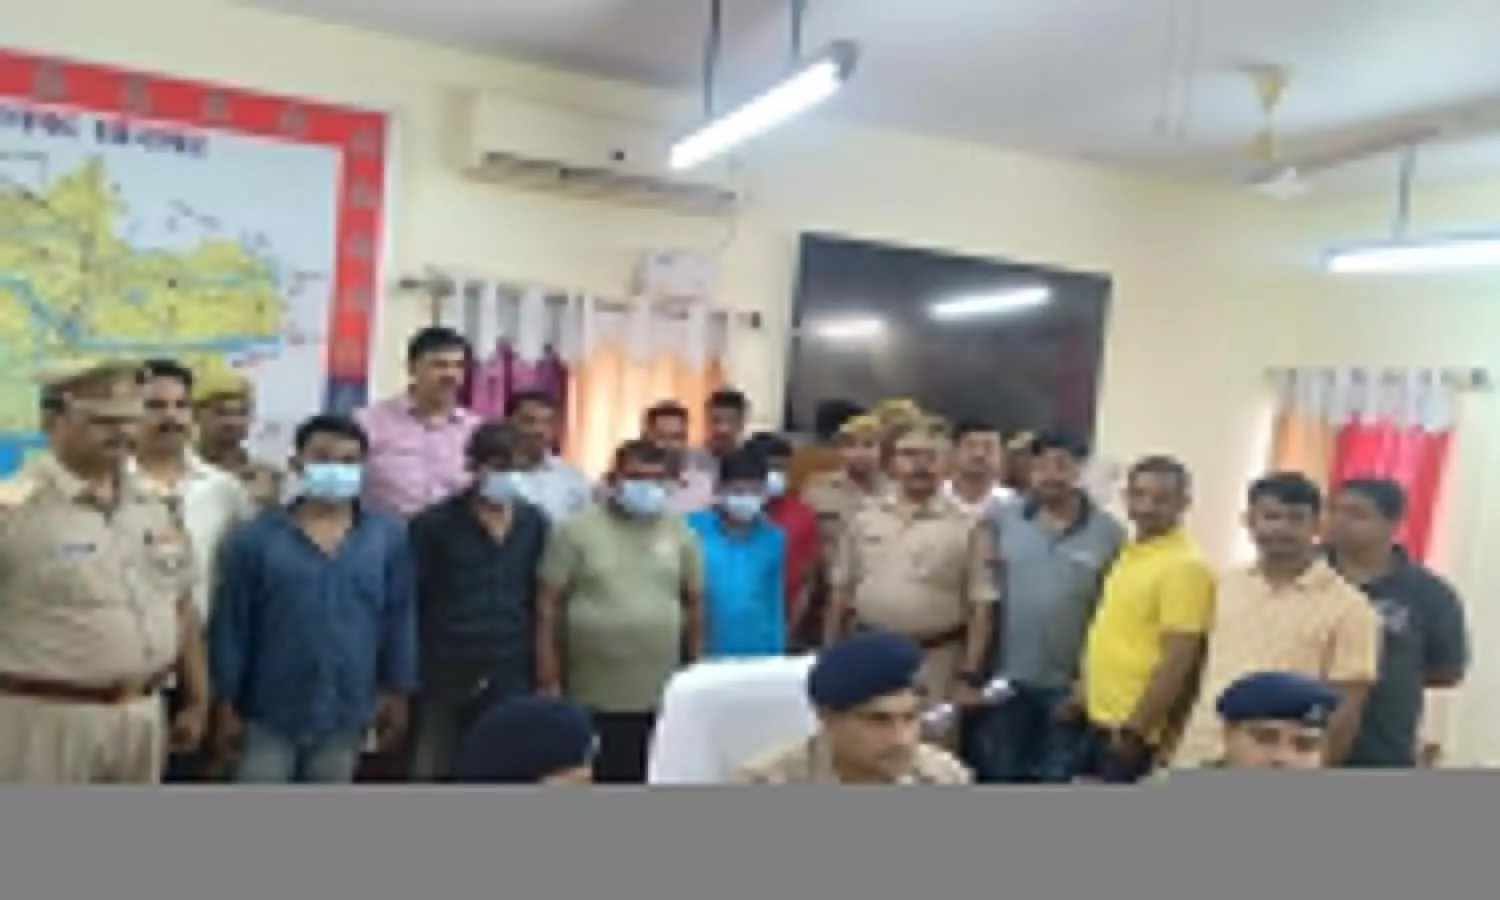 Big gang of heroin smuggling exposed in Sonbhadra, police arrested 10 including five women